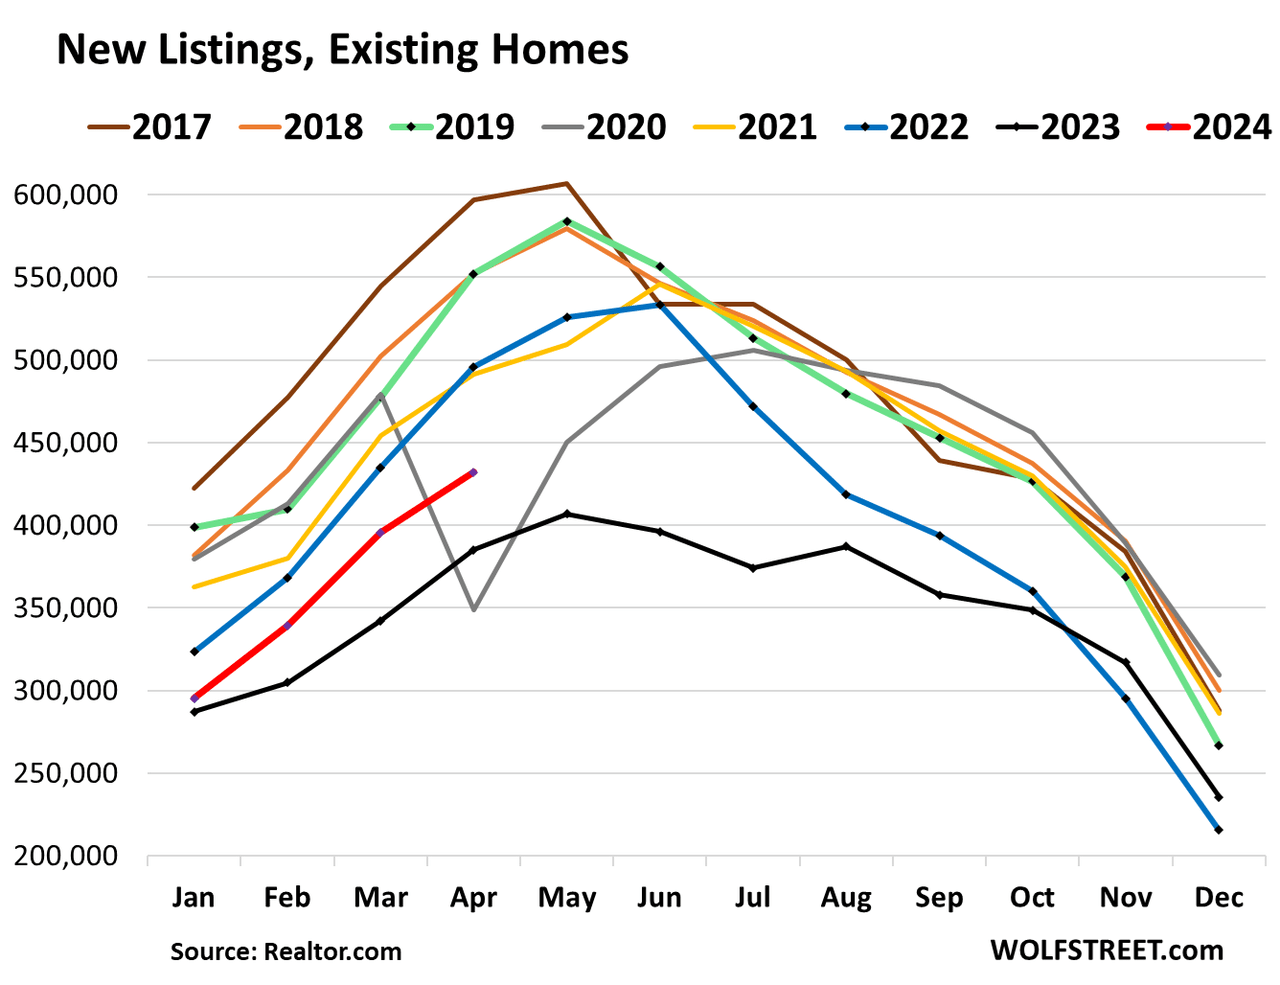 Home Sales Whacked By Mortgage Rates. Active Listings And Price Reductions Jump To Highest In Years. But Sales Of High-End Homes Surge